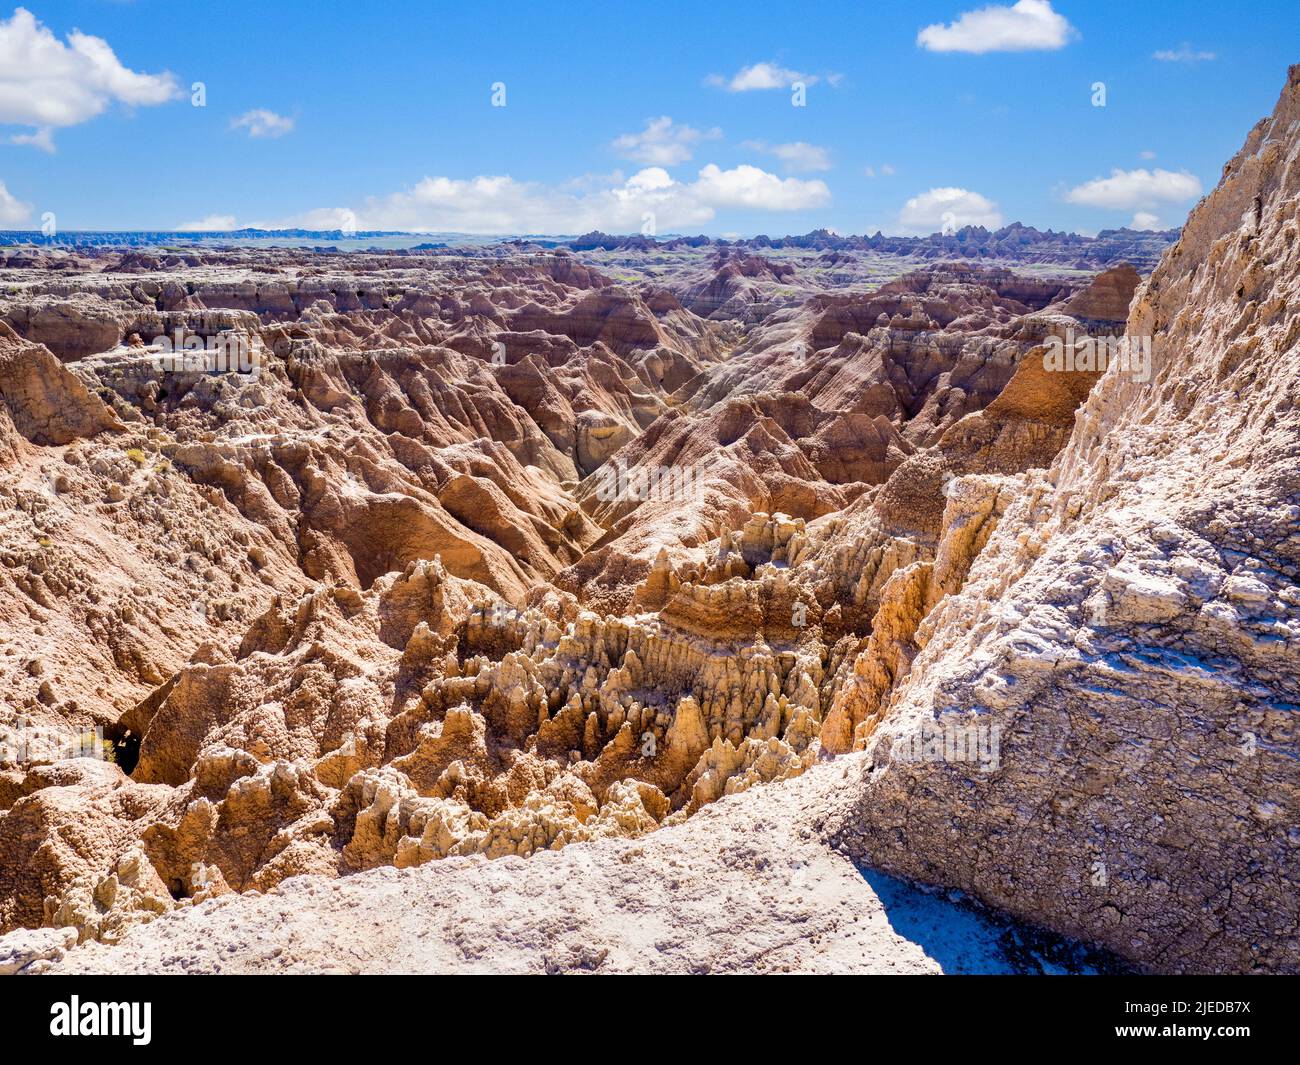 The Windows Trail area of the Badlands National Park in South Dakota USA Stock Photo